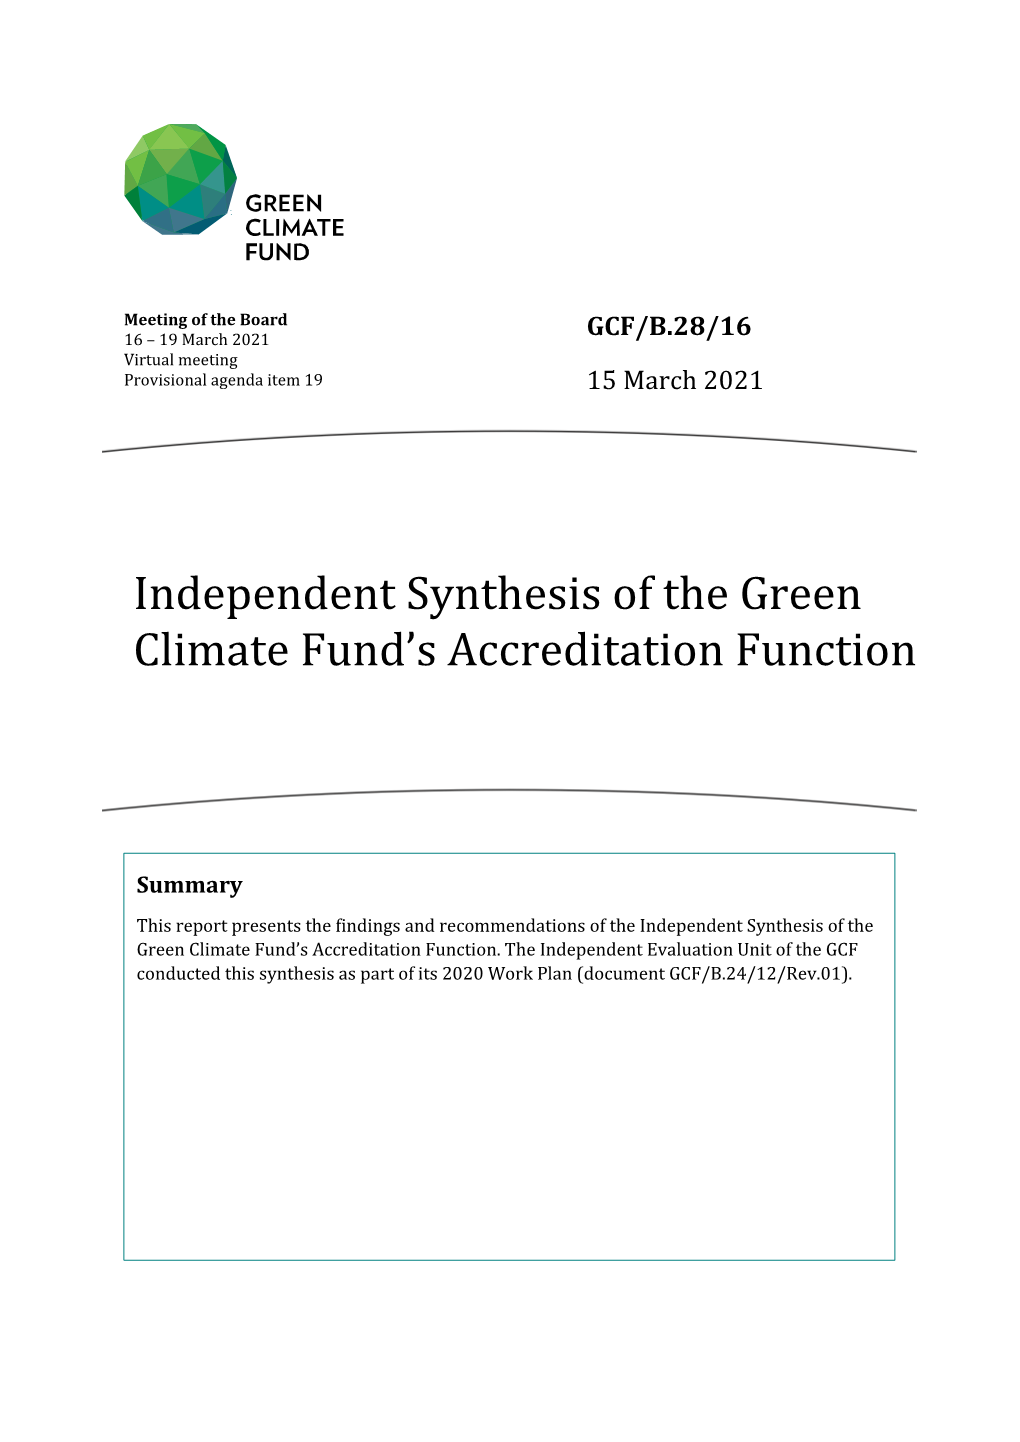 Independent Synthesis of the Green Climate Fund's Accreditation Function